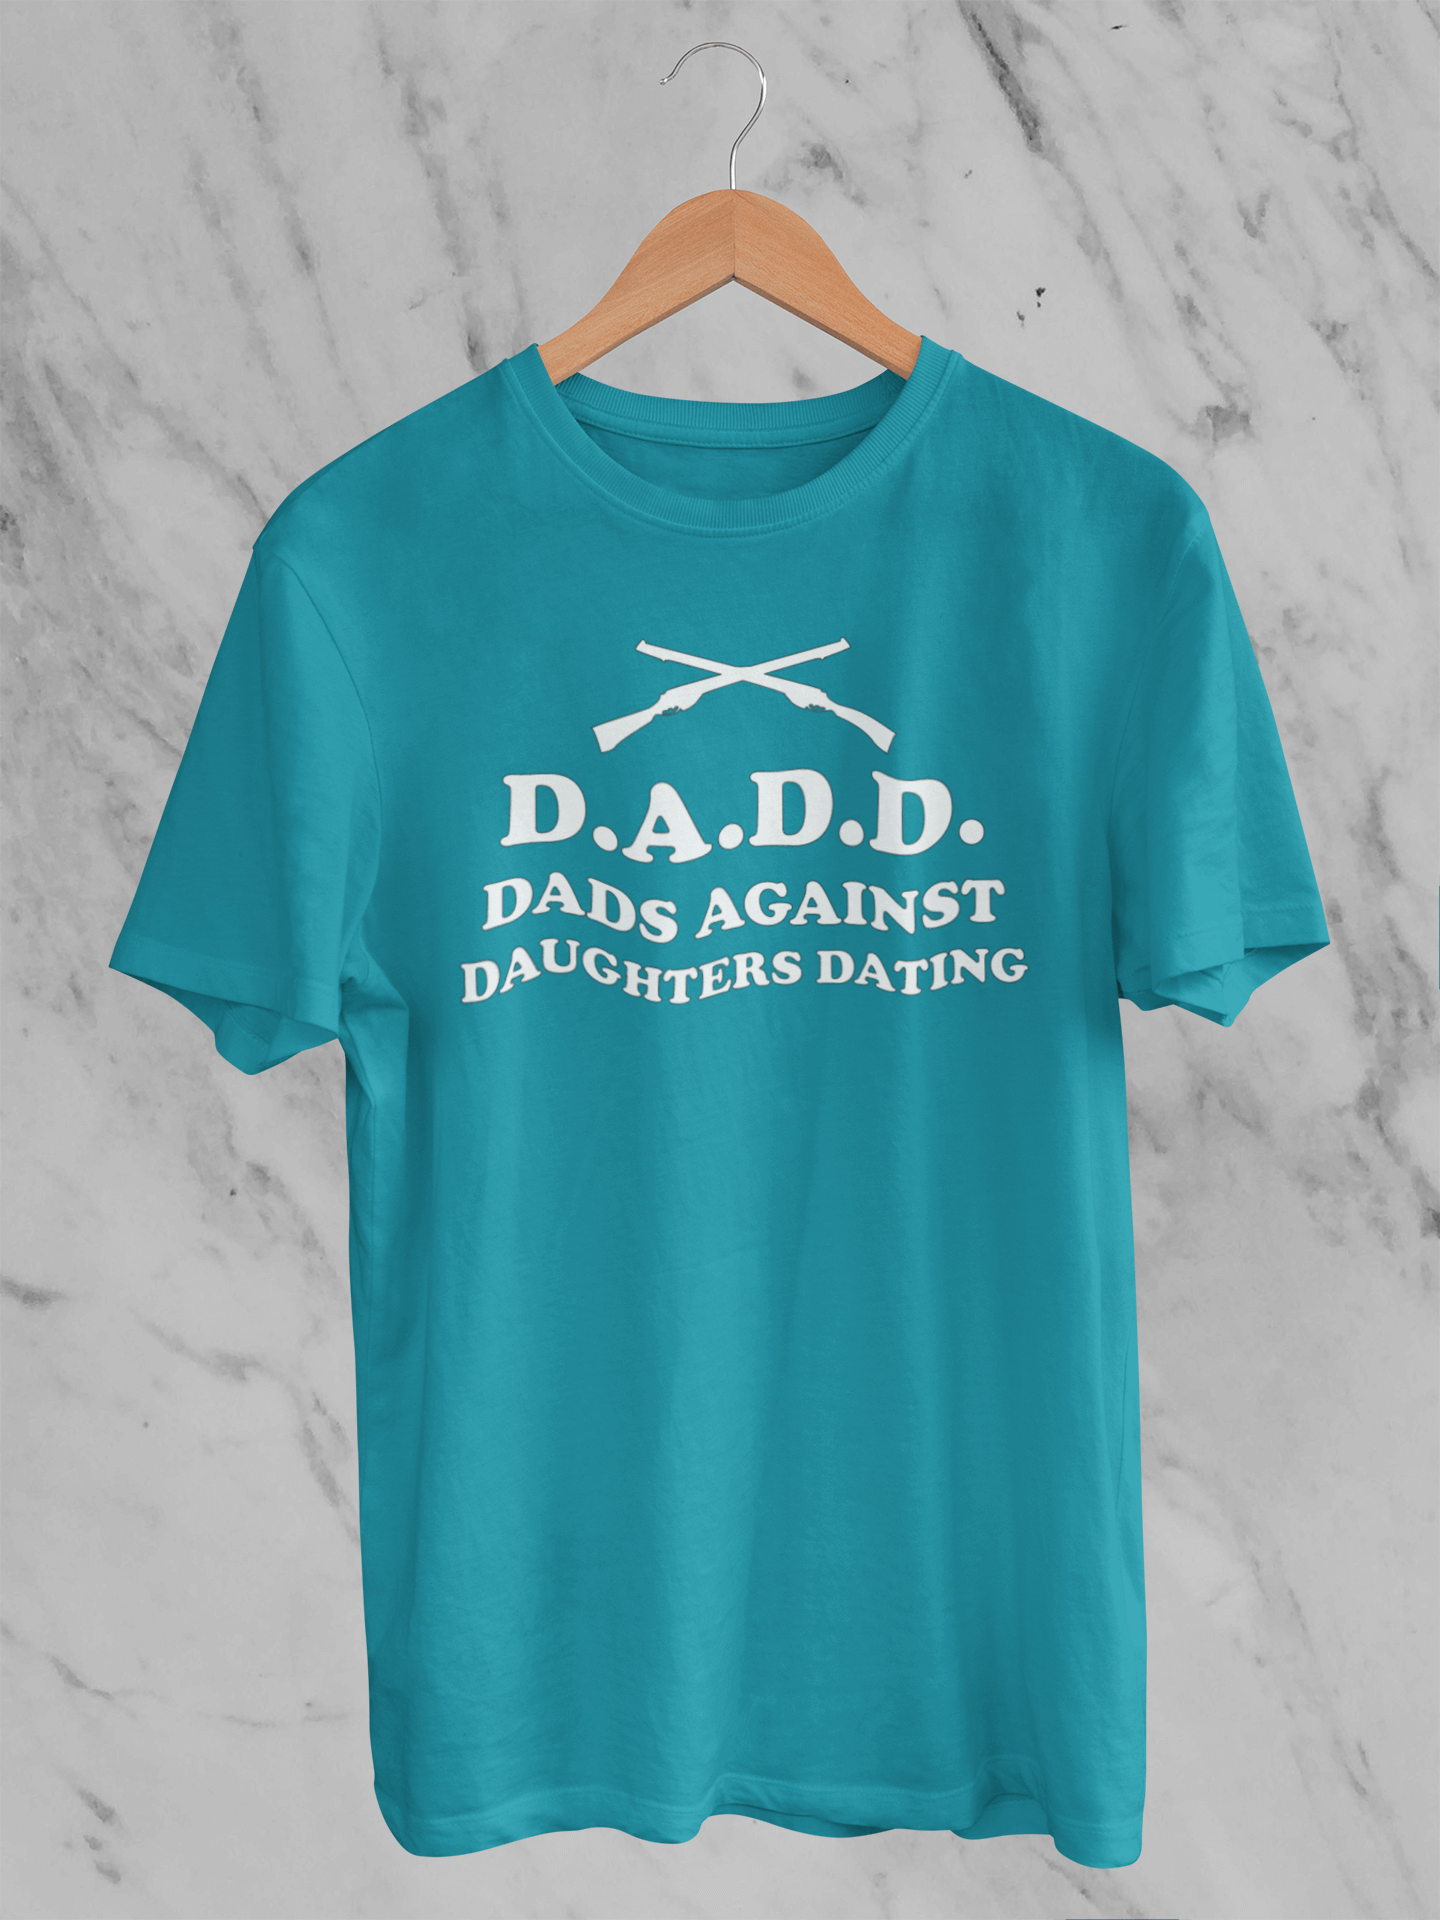 D.A.D.D. - Dads Against Daughters Dating - T-Shirt